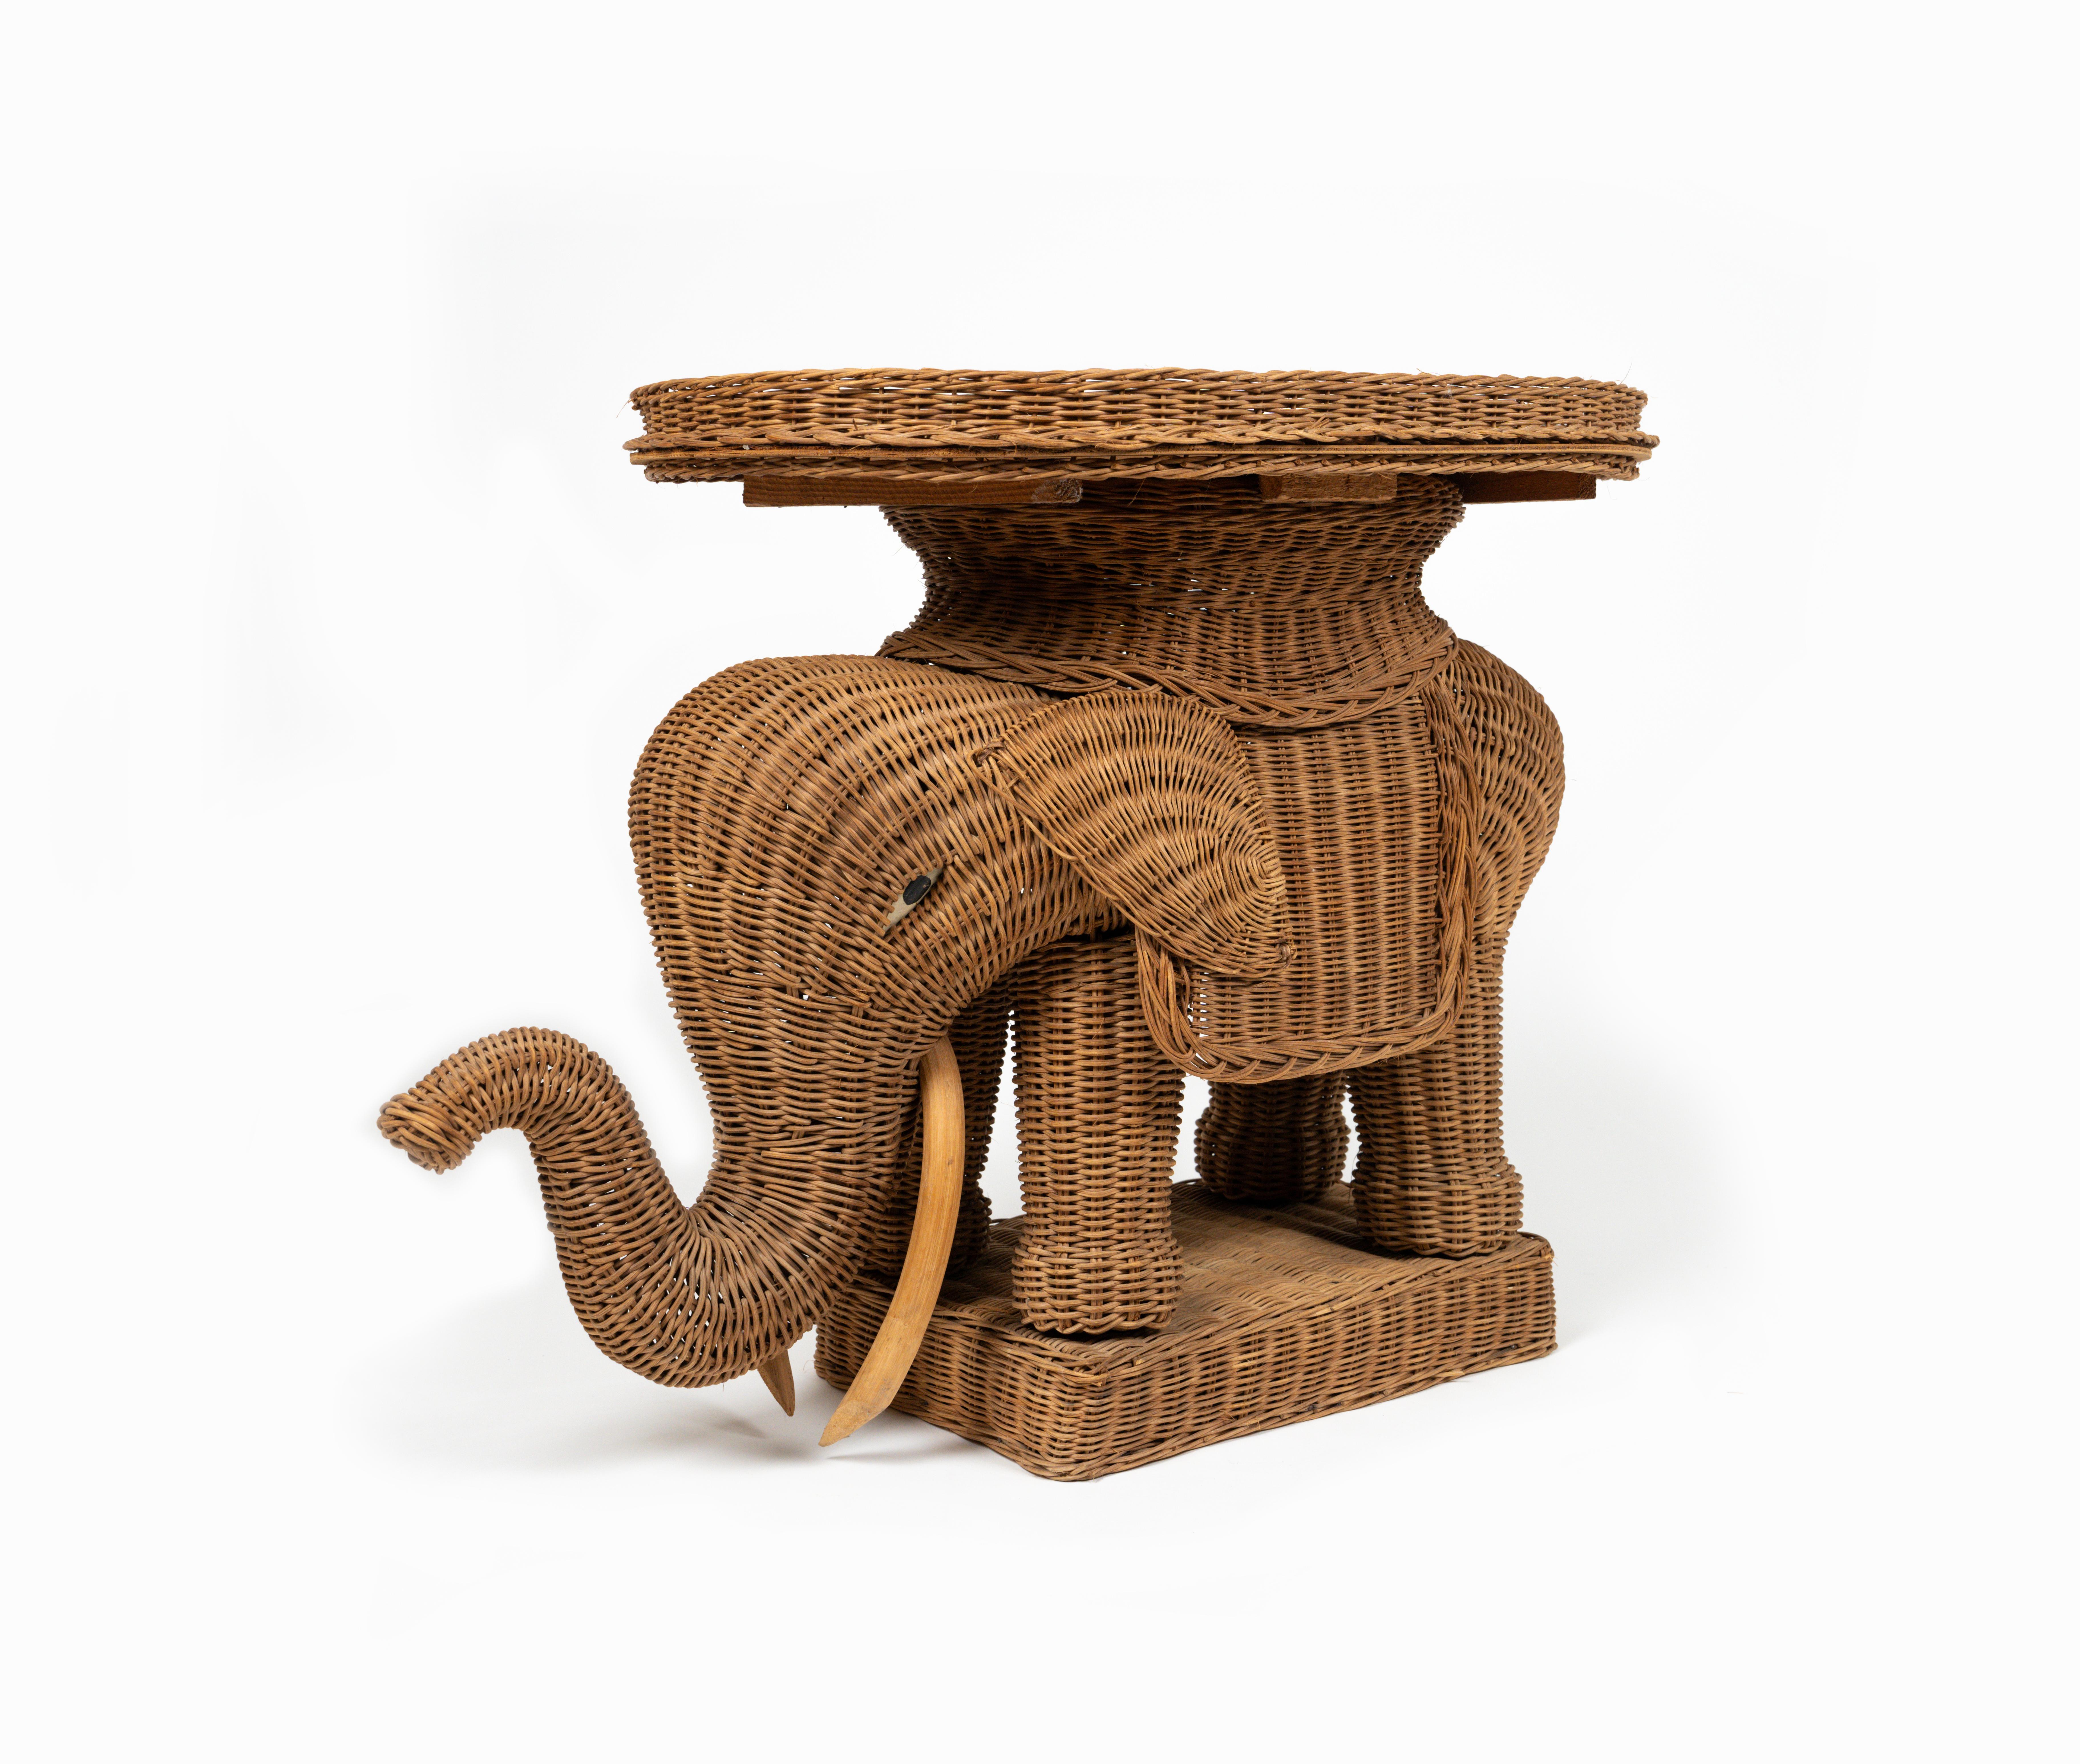 Rattan & Wicker Elephant Side Coffee Table Vivai Del Sud Style, Italy, 1960s For Sale 5